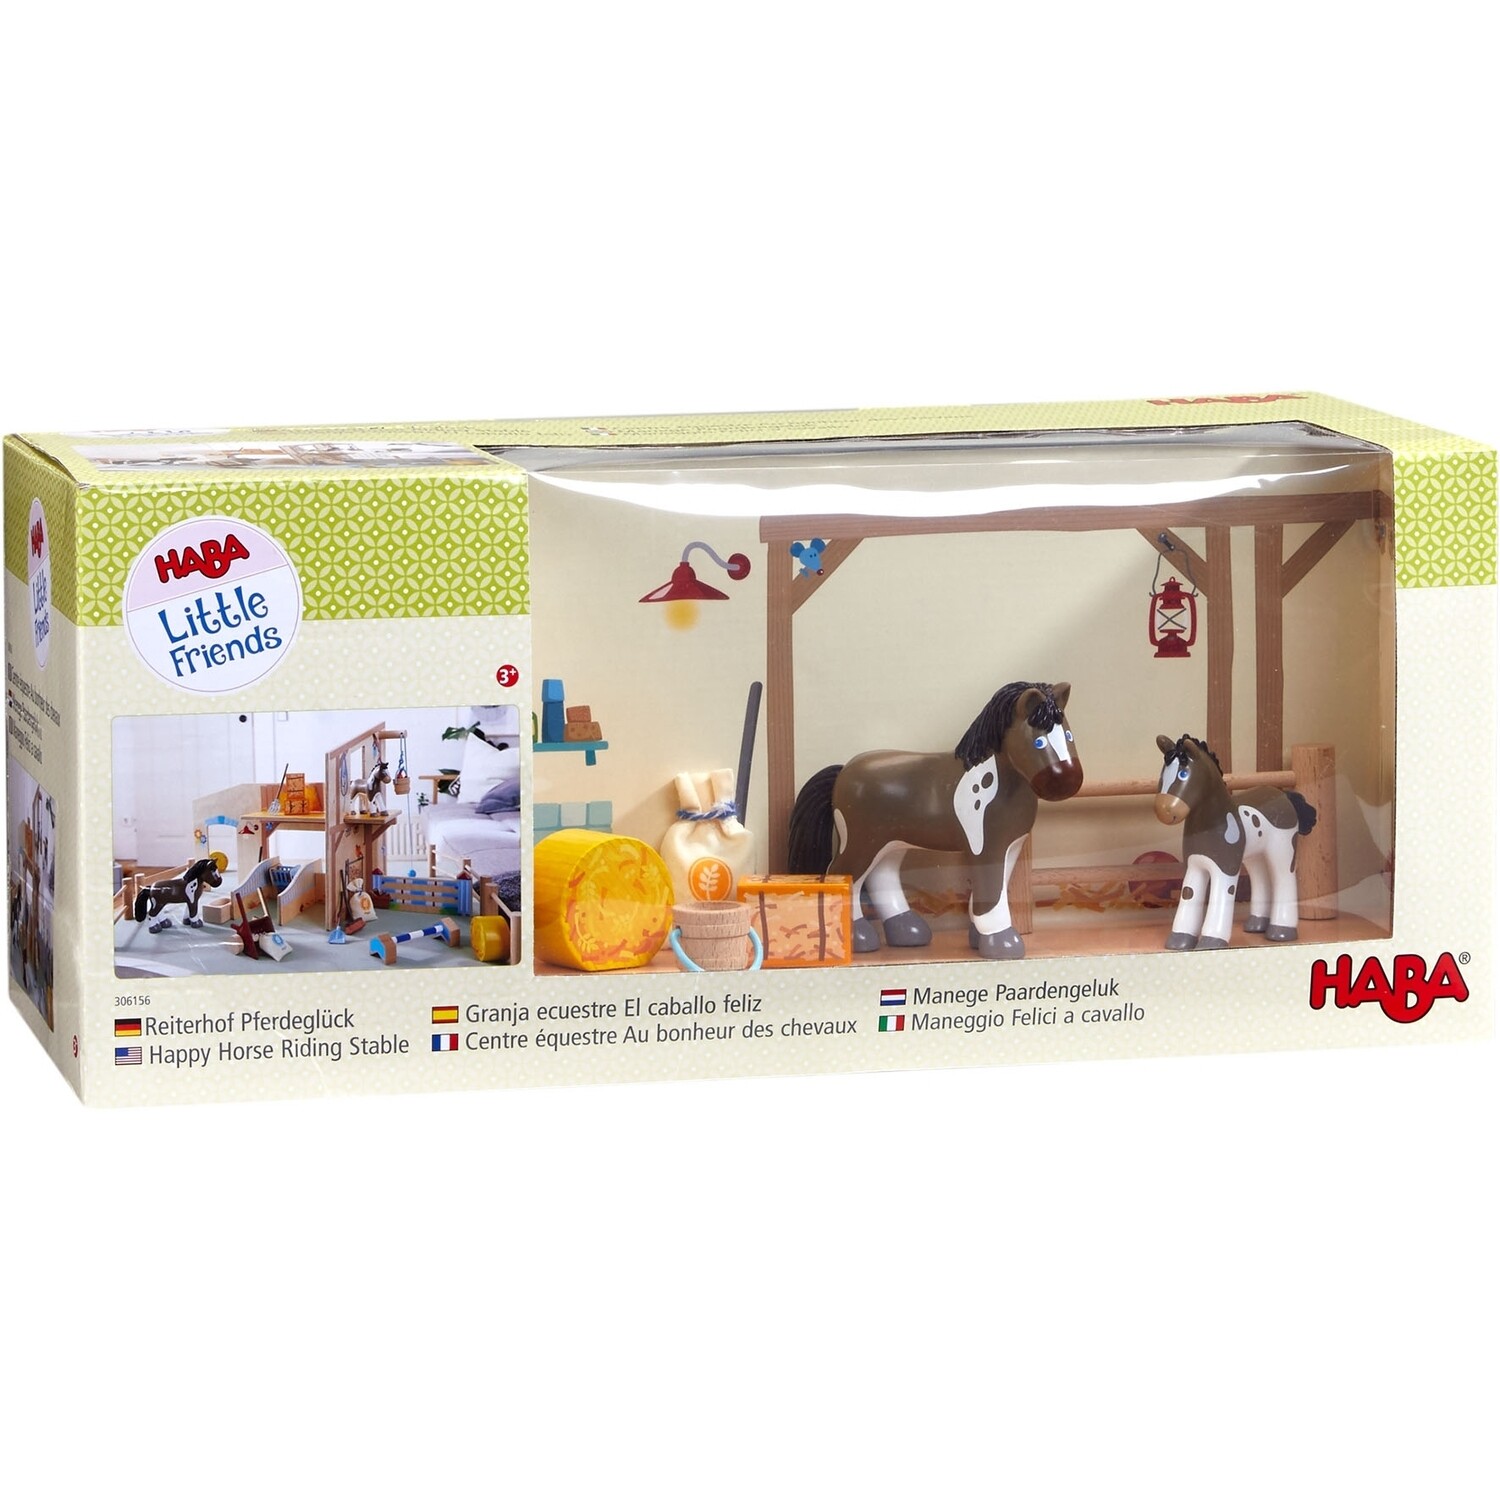 Haba Little Friends -Happy Hour Riding Stable*